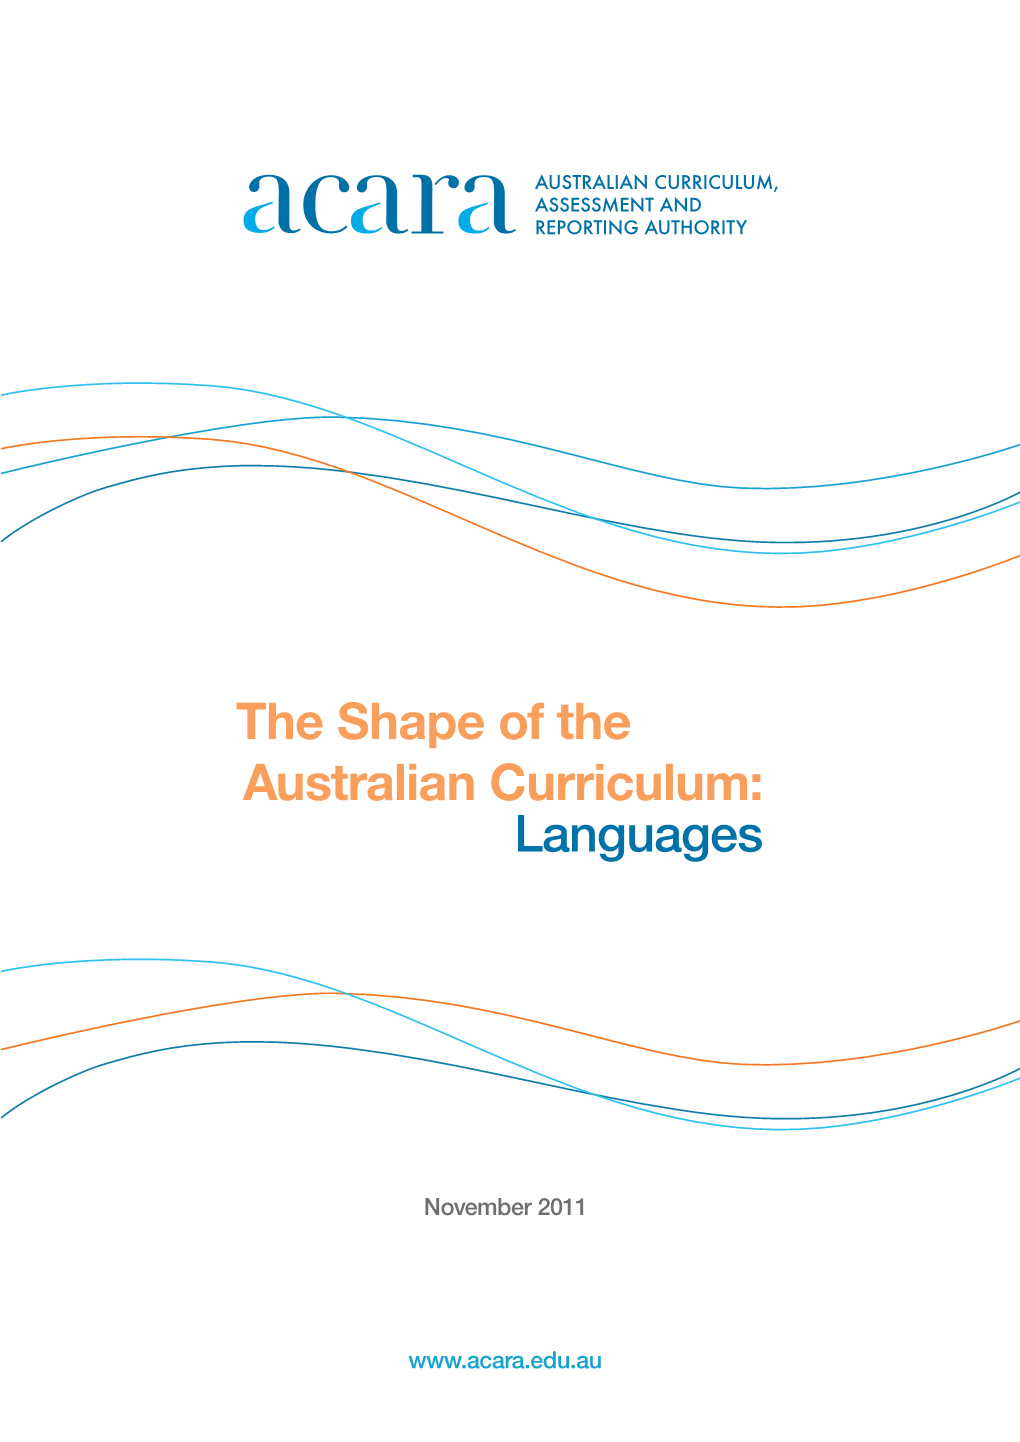 The Shape of the Australian Curriculum: Languages